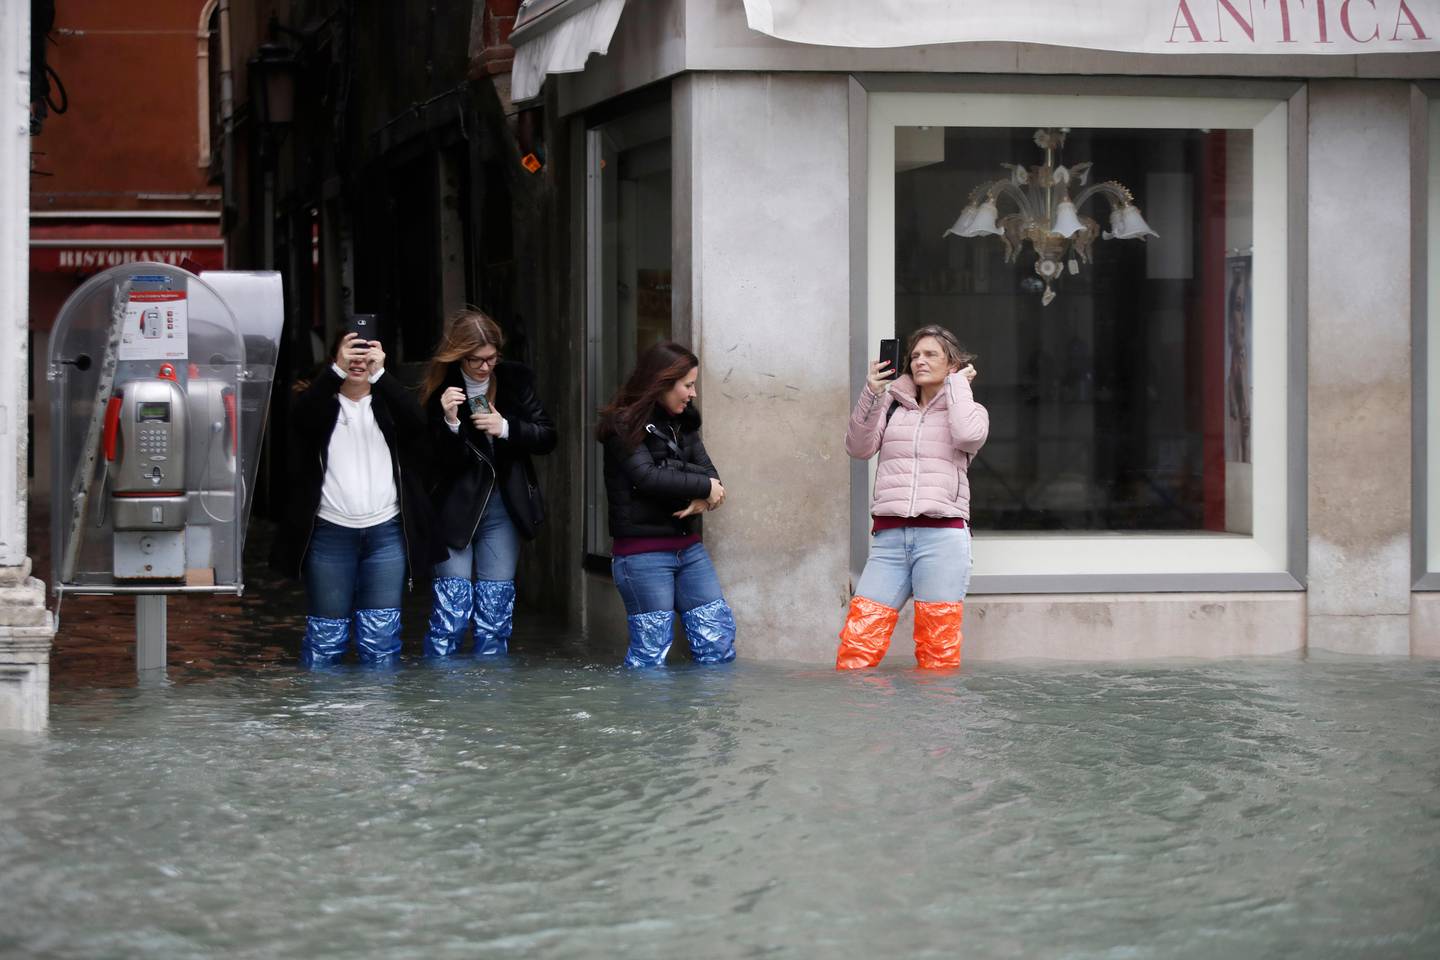 Tourists take pictures of a flooded Venice, Italy, Friday, Nov. 15, 2019. The high-water mark hit 187 centimeters (74 inches) late Tuesday, Nov. 12, 2019, meaning more than 85% of the city was flooded. The highest level ever recorded was 194 centimeters (76 inches) during infamous flooding in 1966. (AP Photo/Luca Bruno)